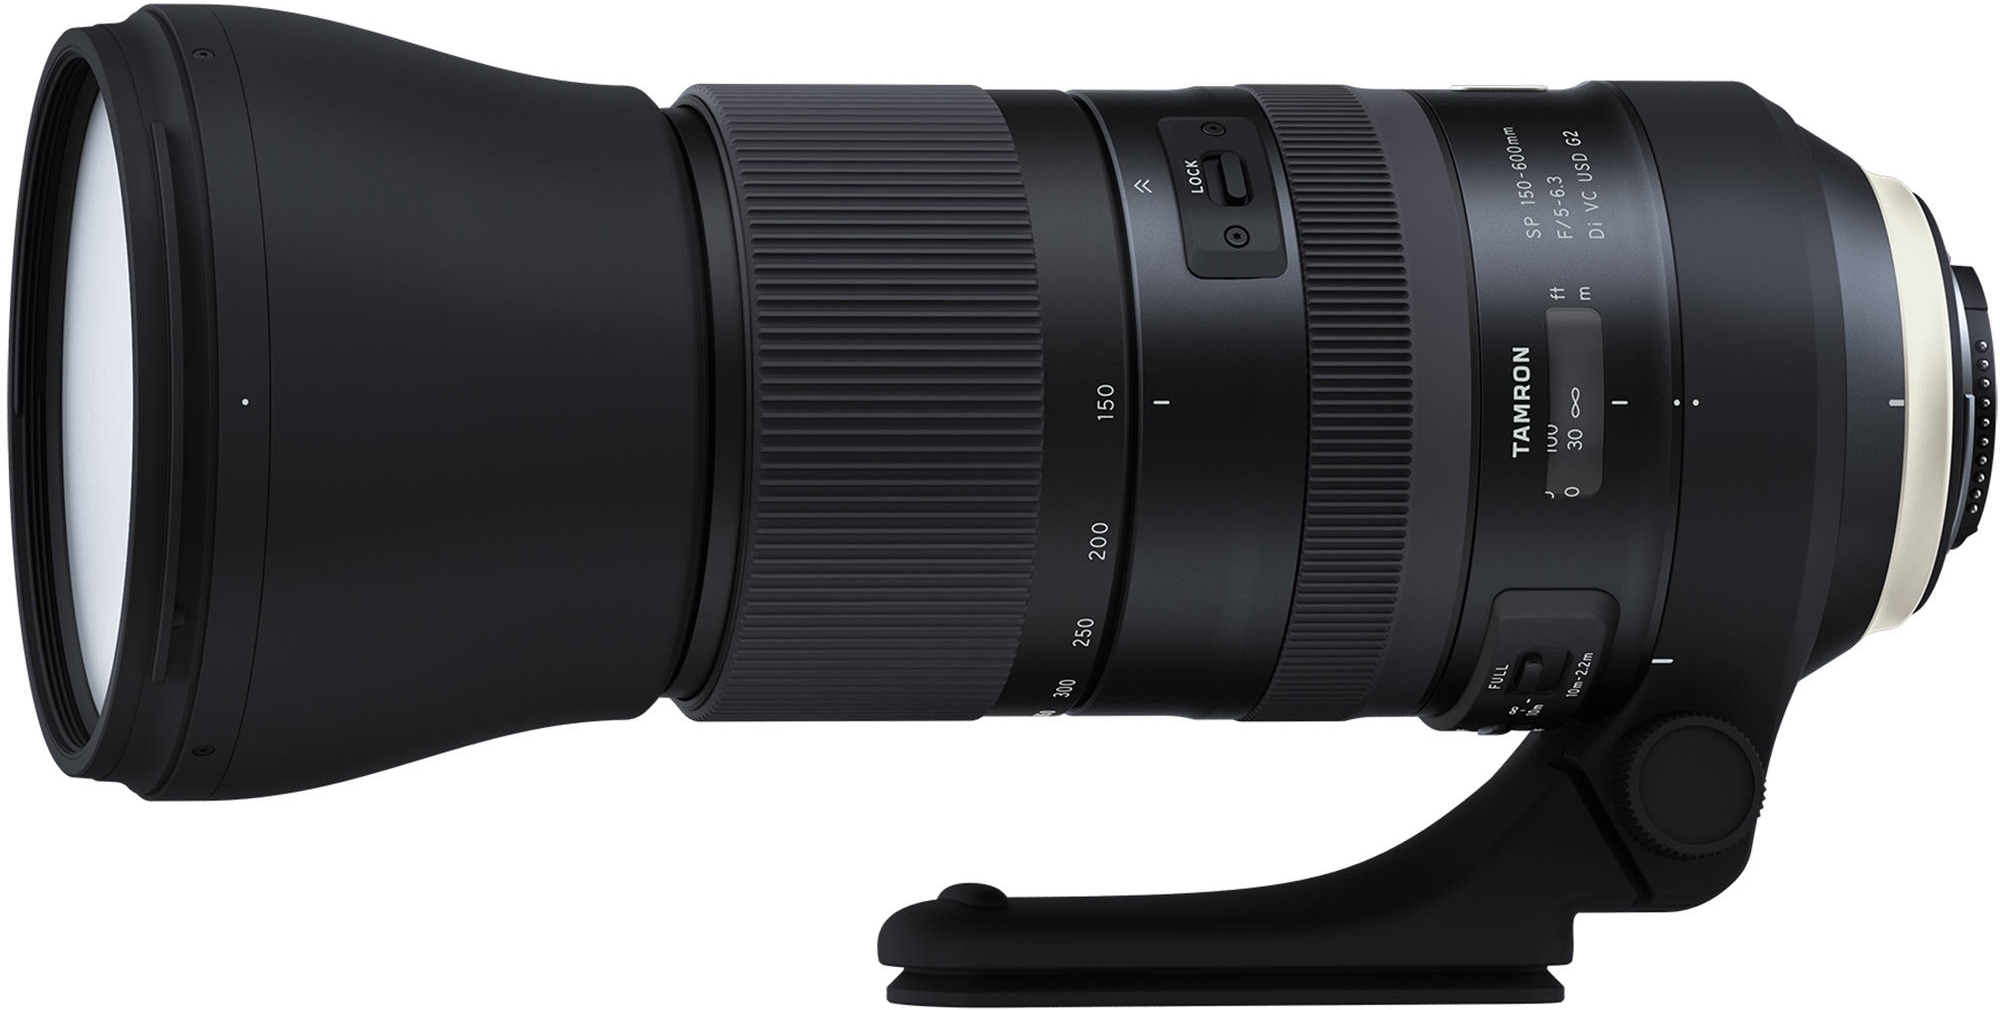 Tamron Objectif Sp Af 150 600 Mm F5 63 Di Vc Usd G2 Canon